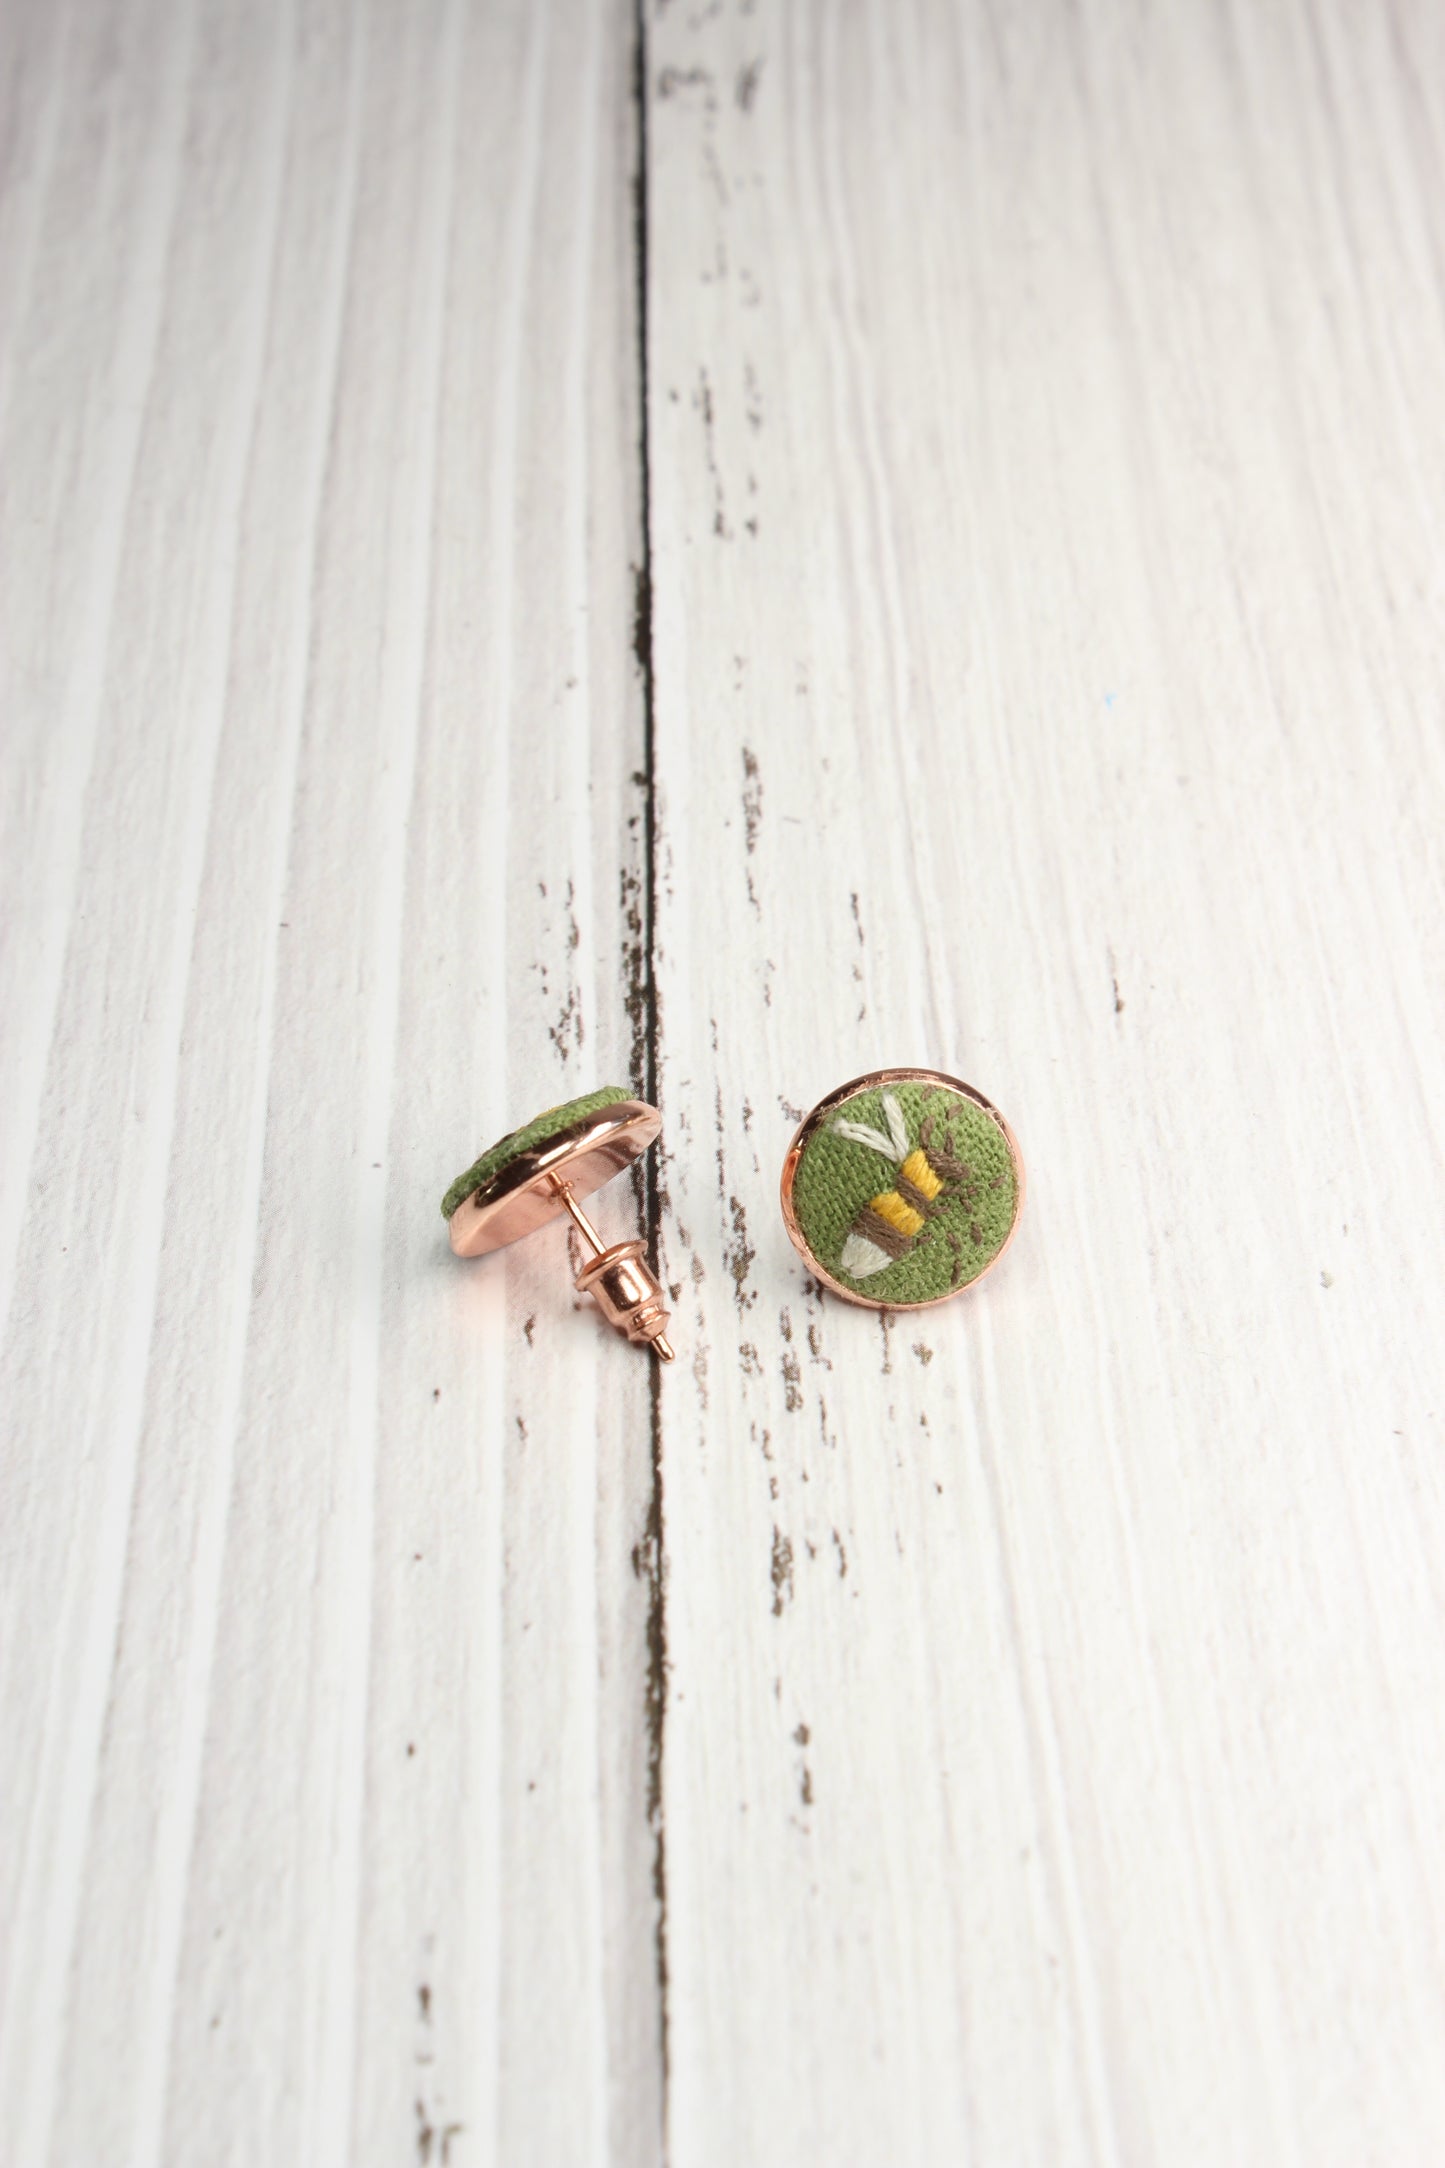 Embroidery Bee Rose Gold Studs Earrings